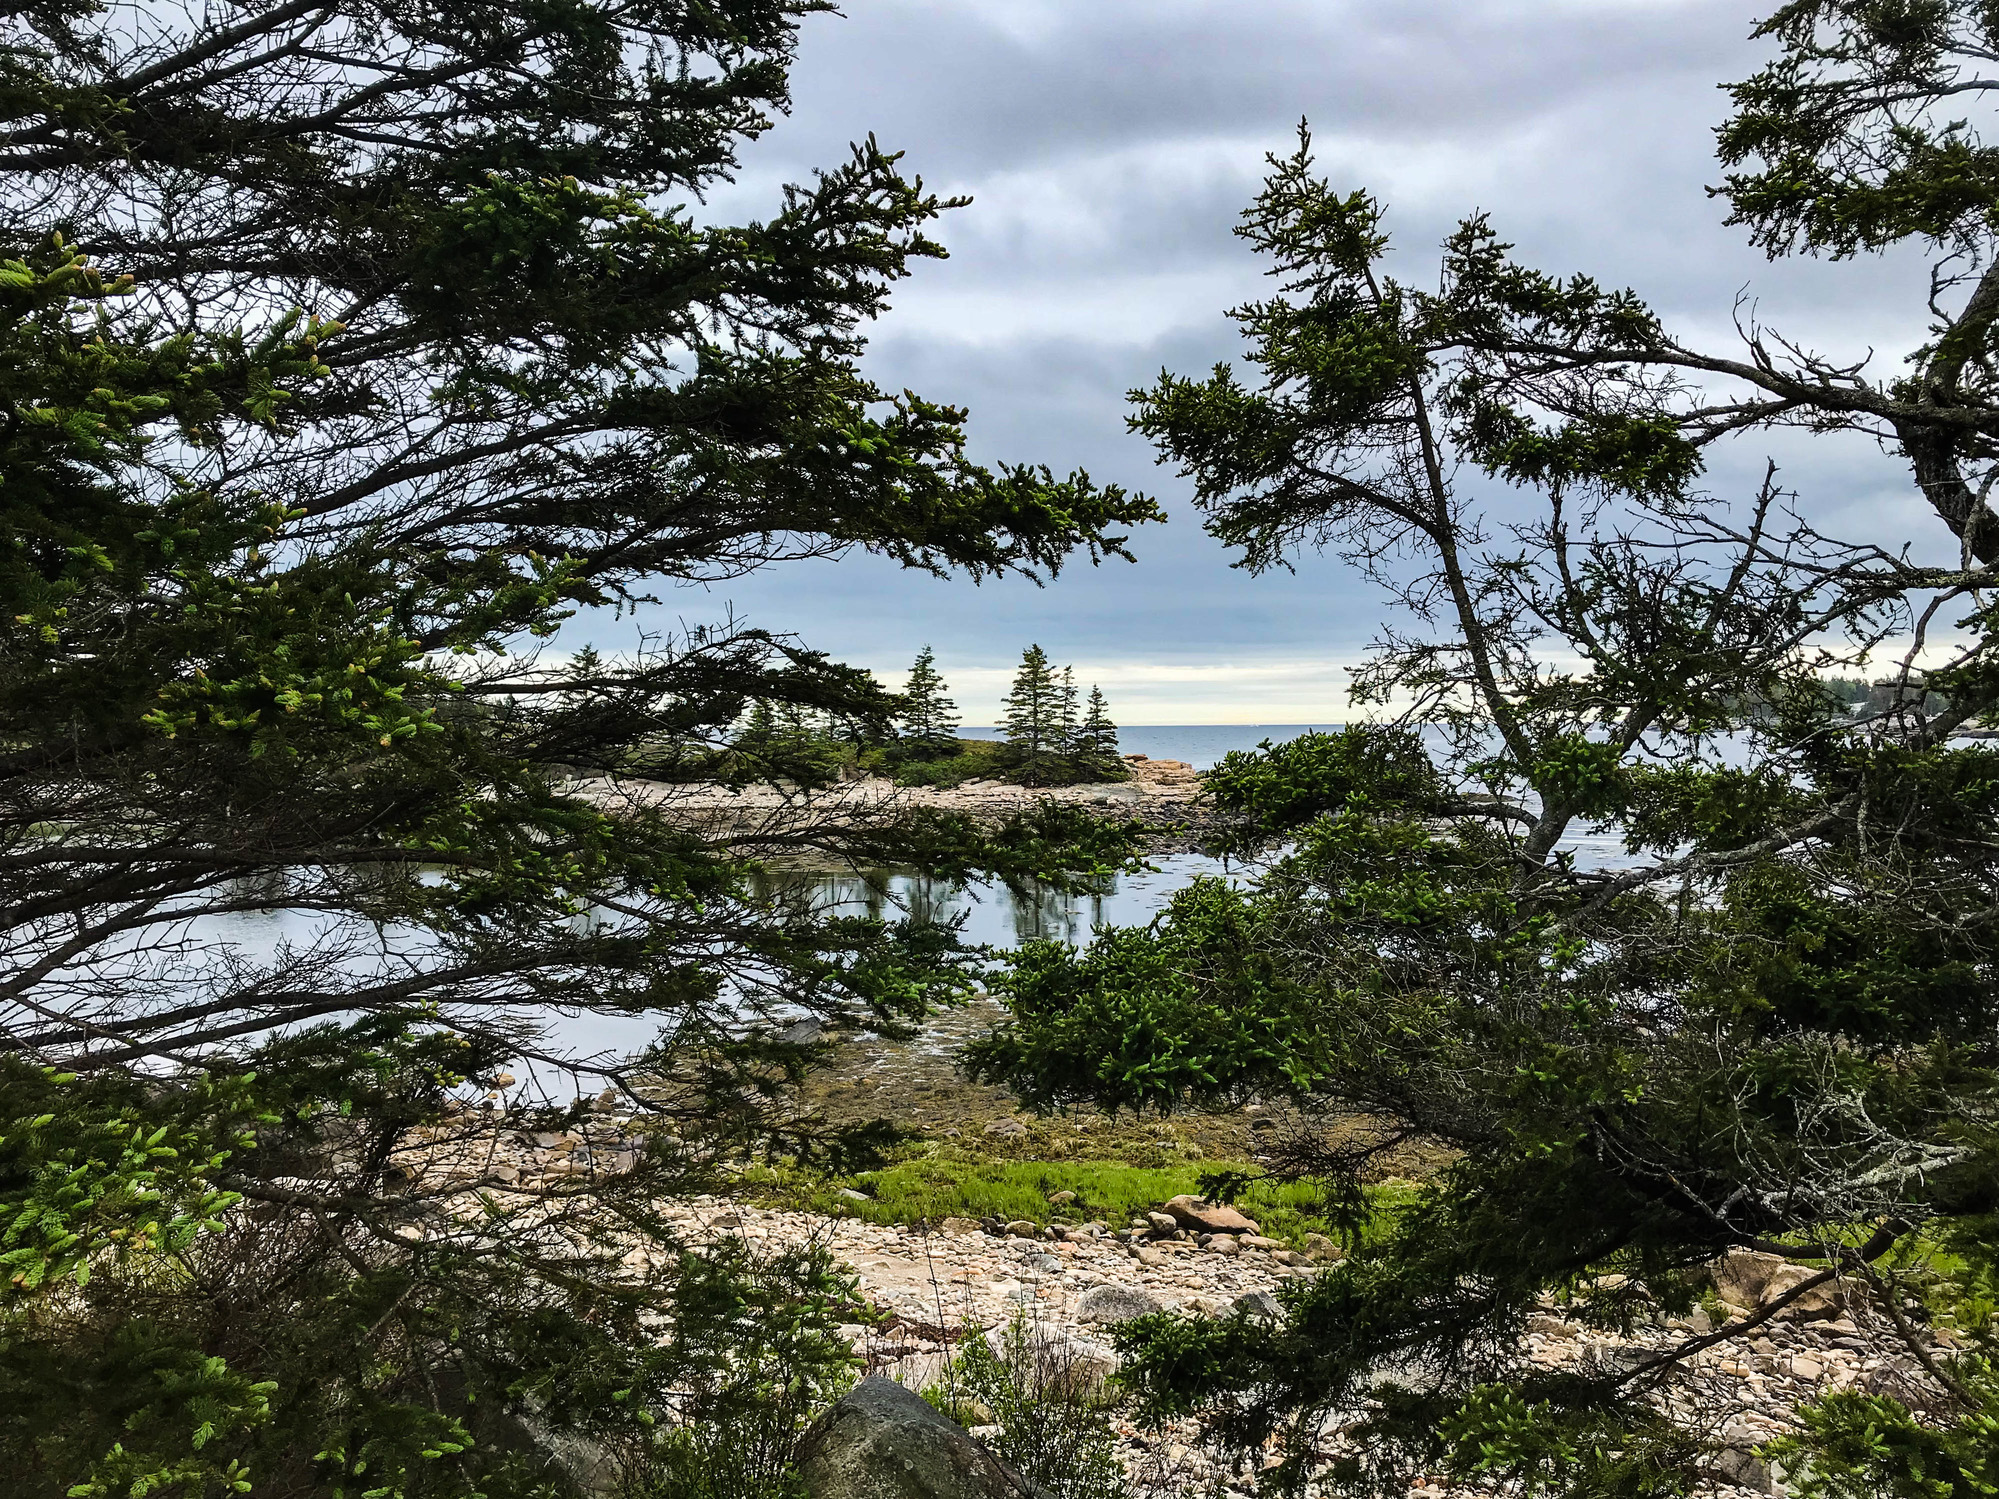 View of the rocky shoreline through branches of trees